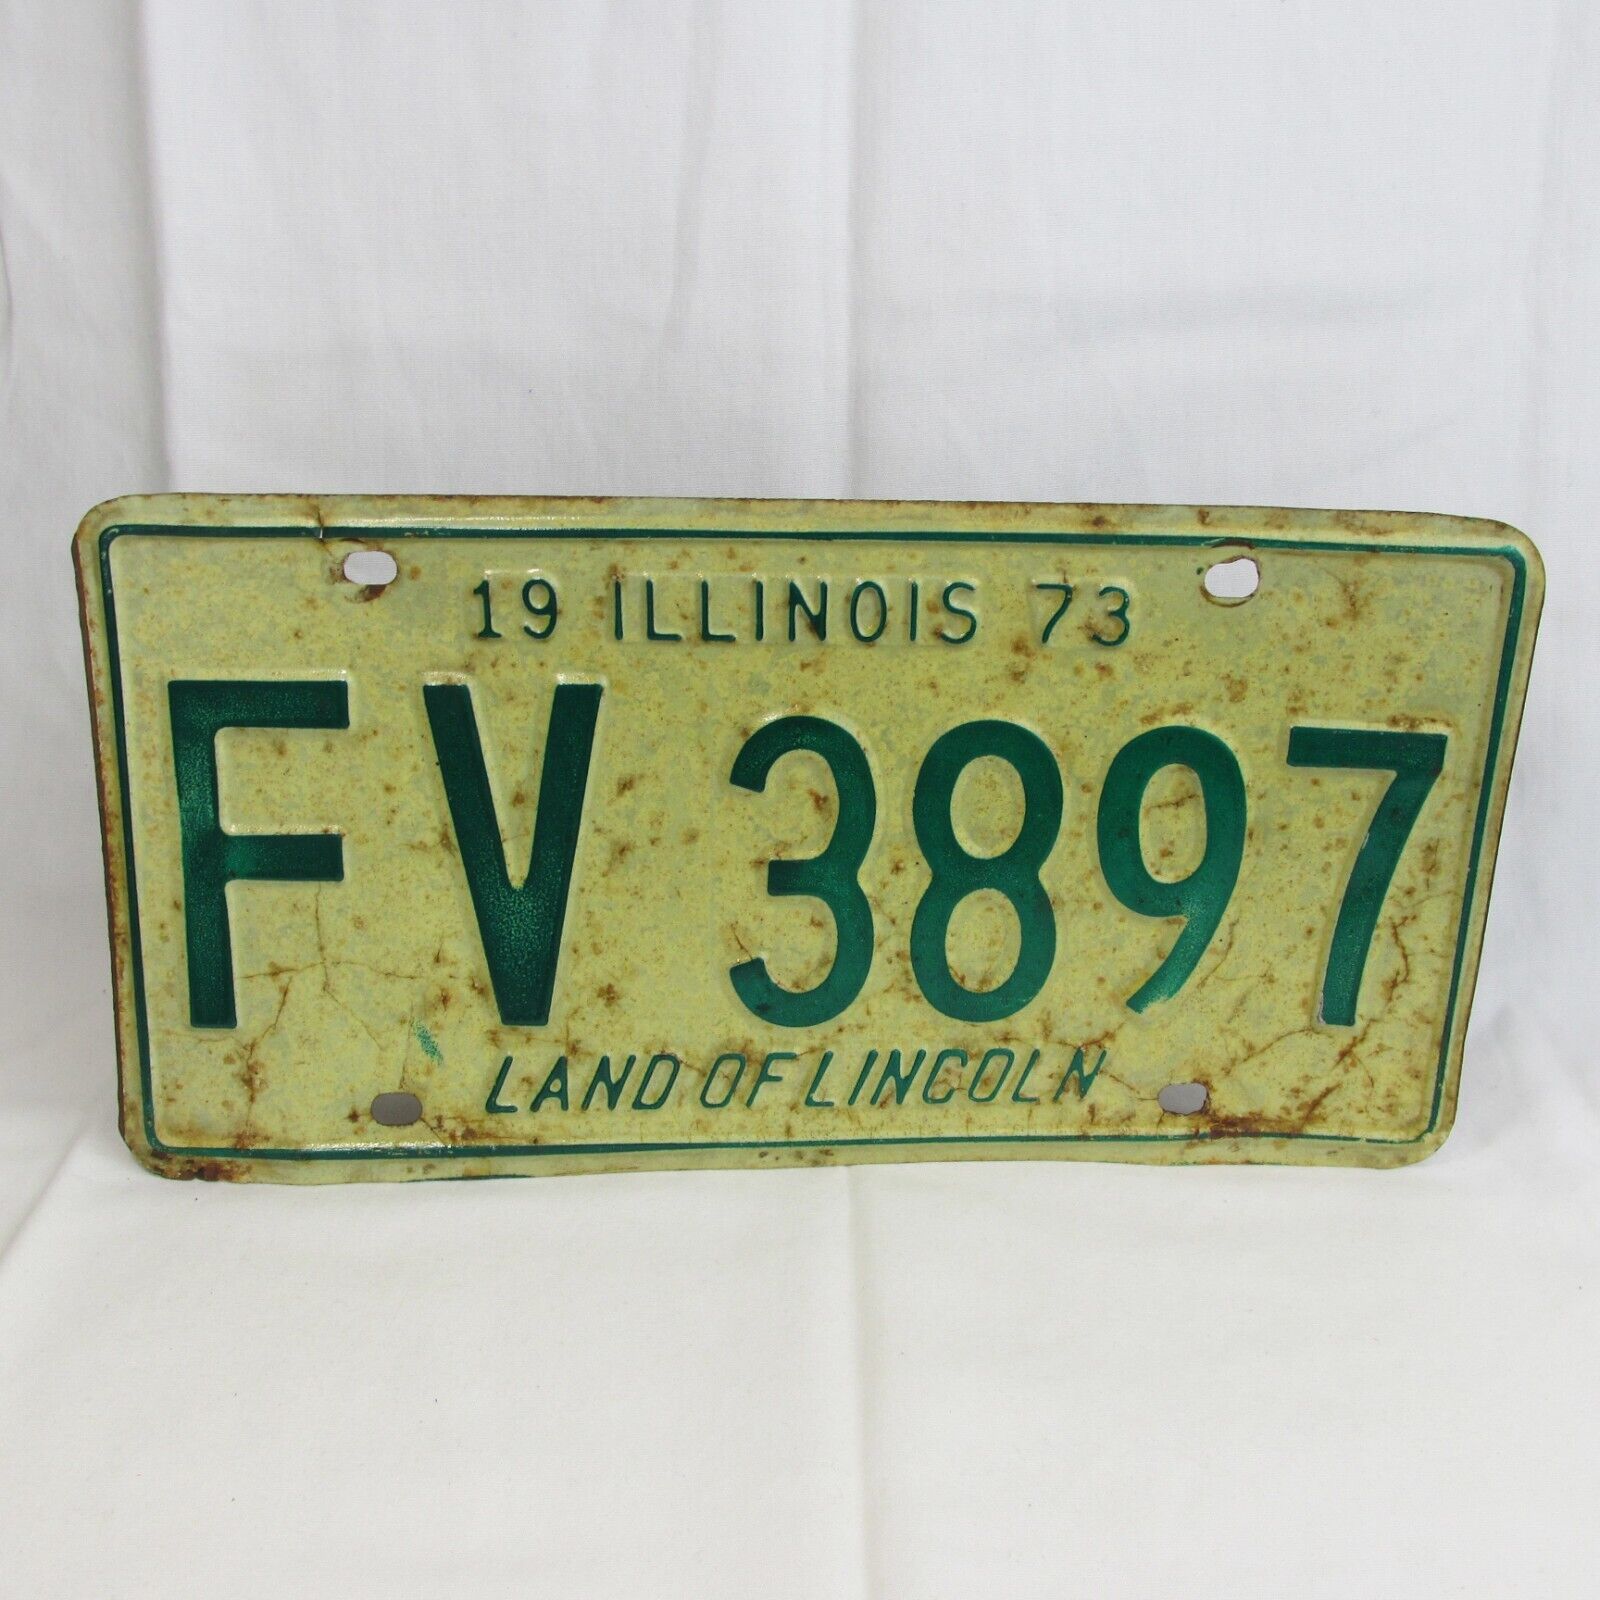 Vintage White & Green 1973 Illinois License Plate FV 3897 Land of Lincoln